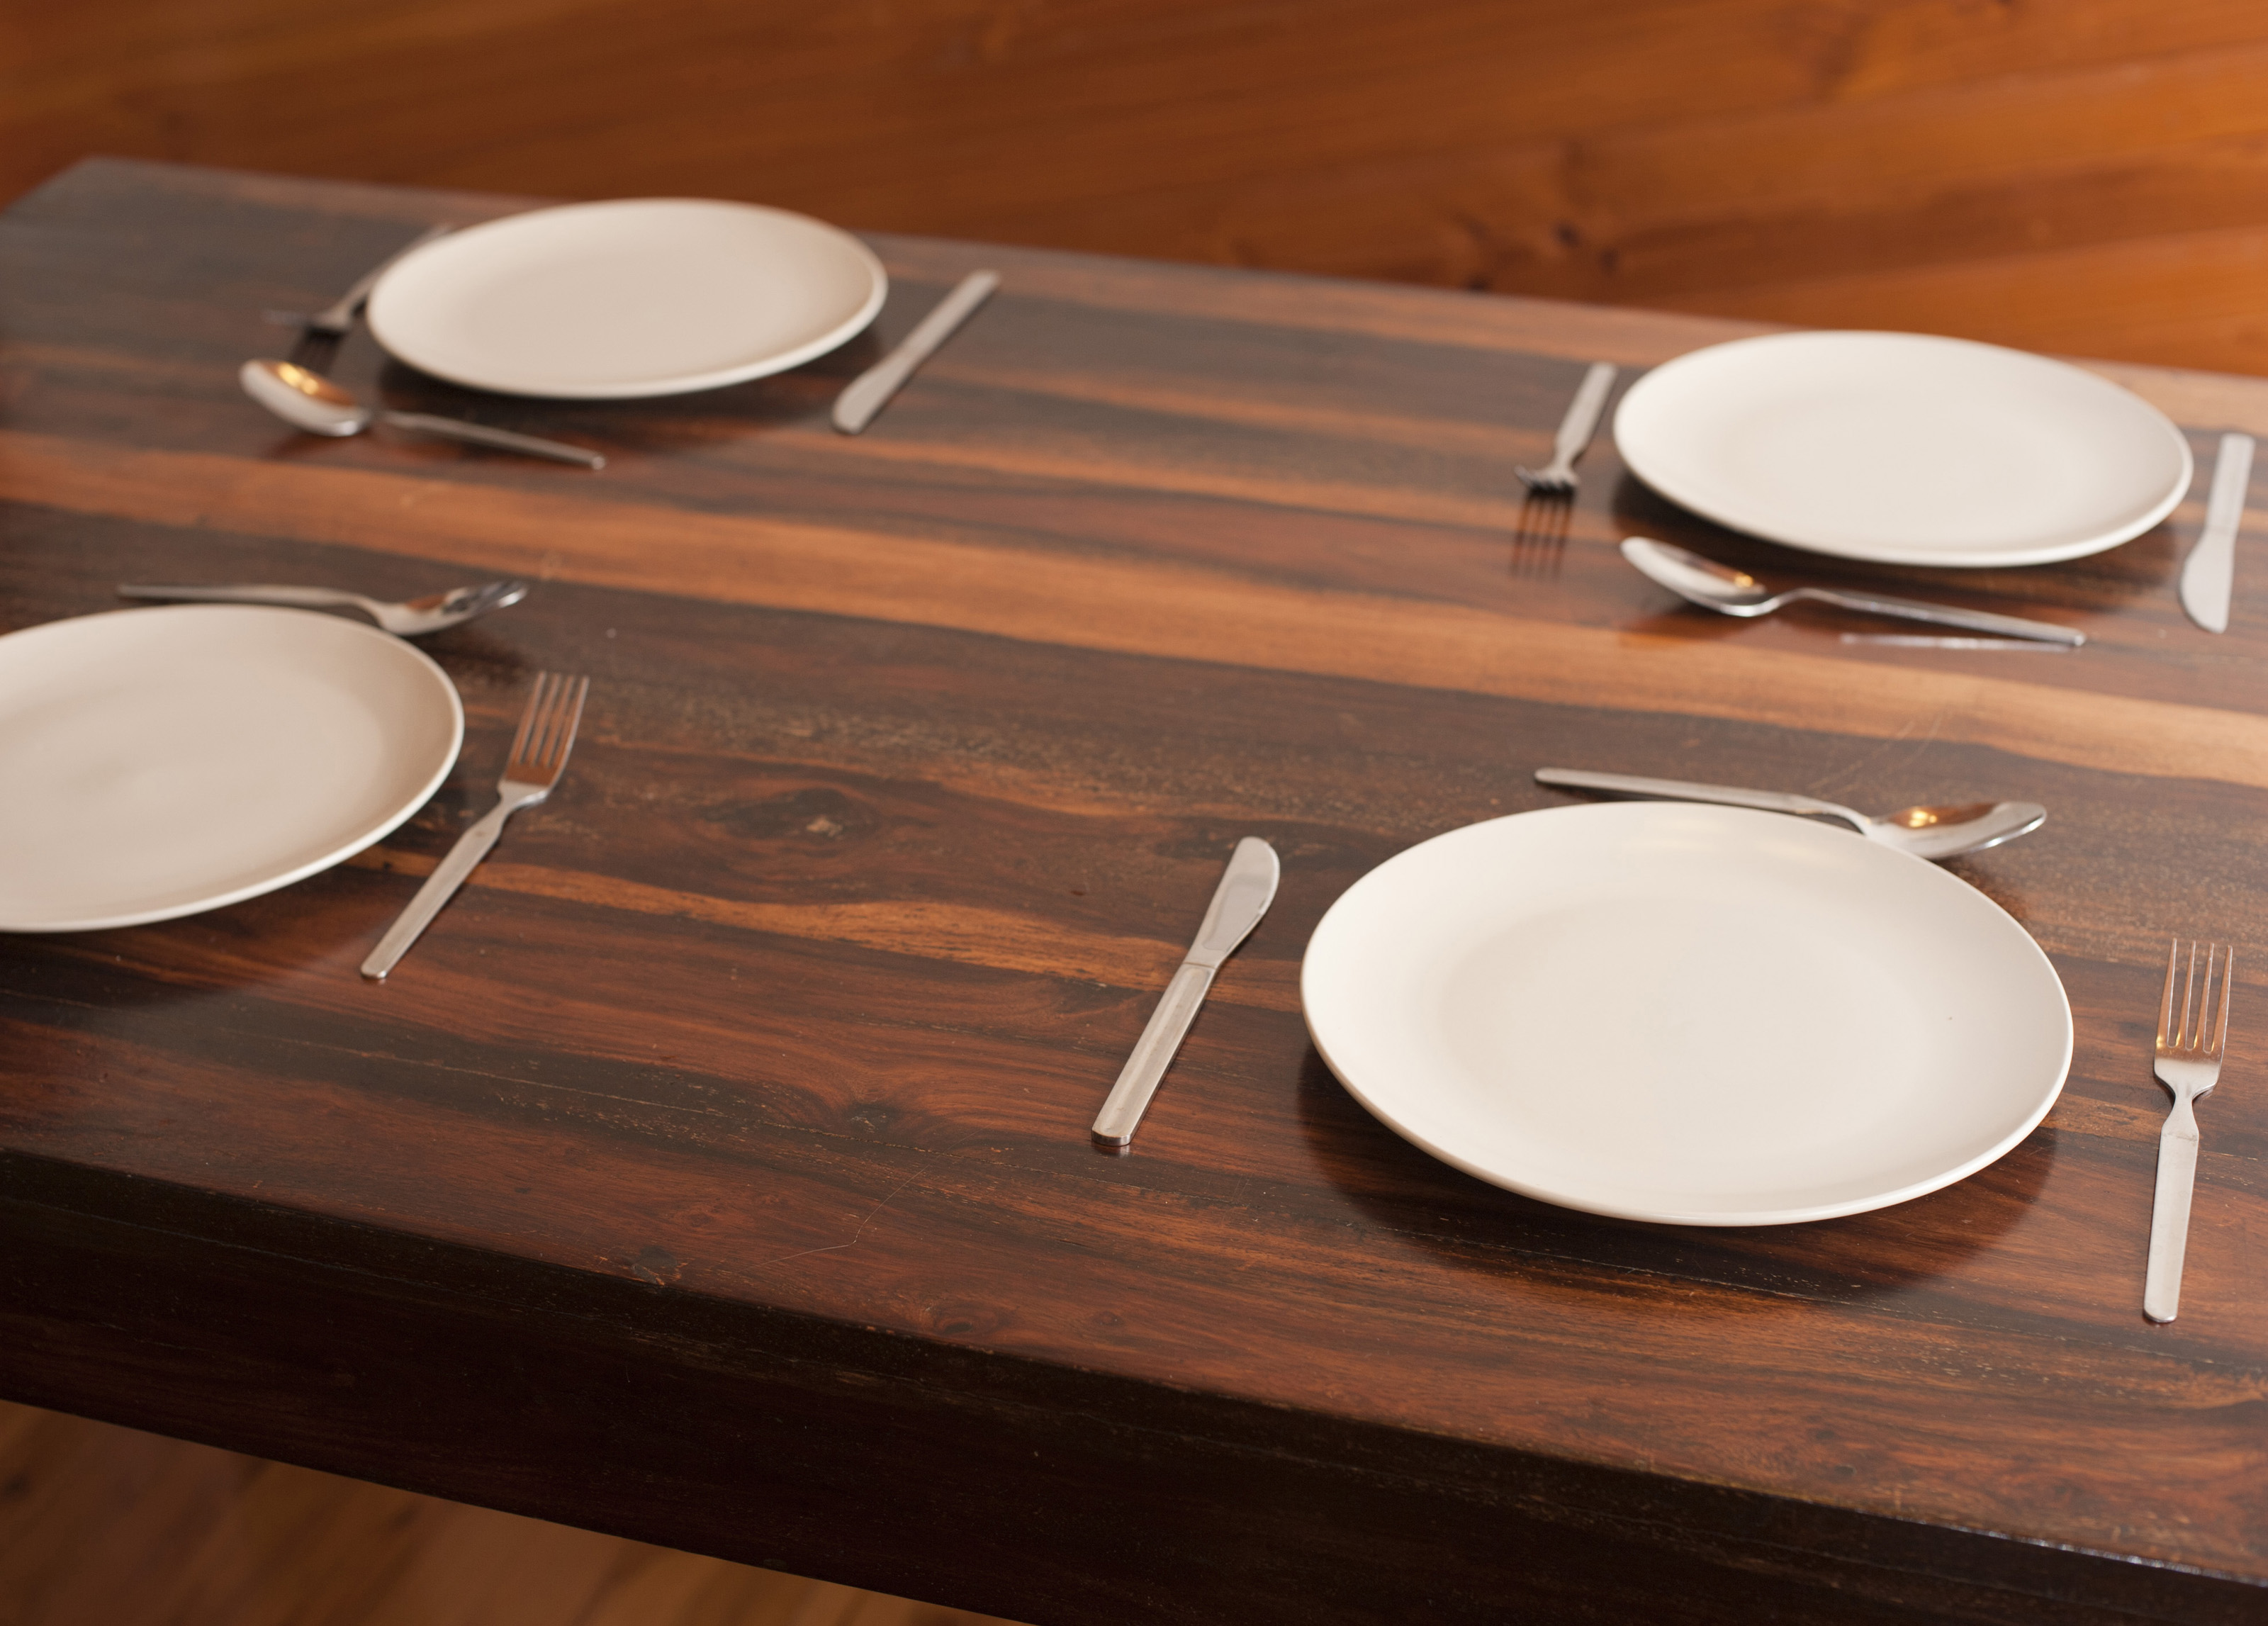 Free Stock Photo 8844 Four place settings on a dinner table | freeimageslive